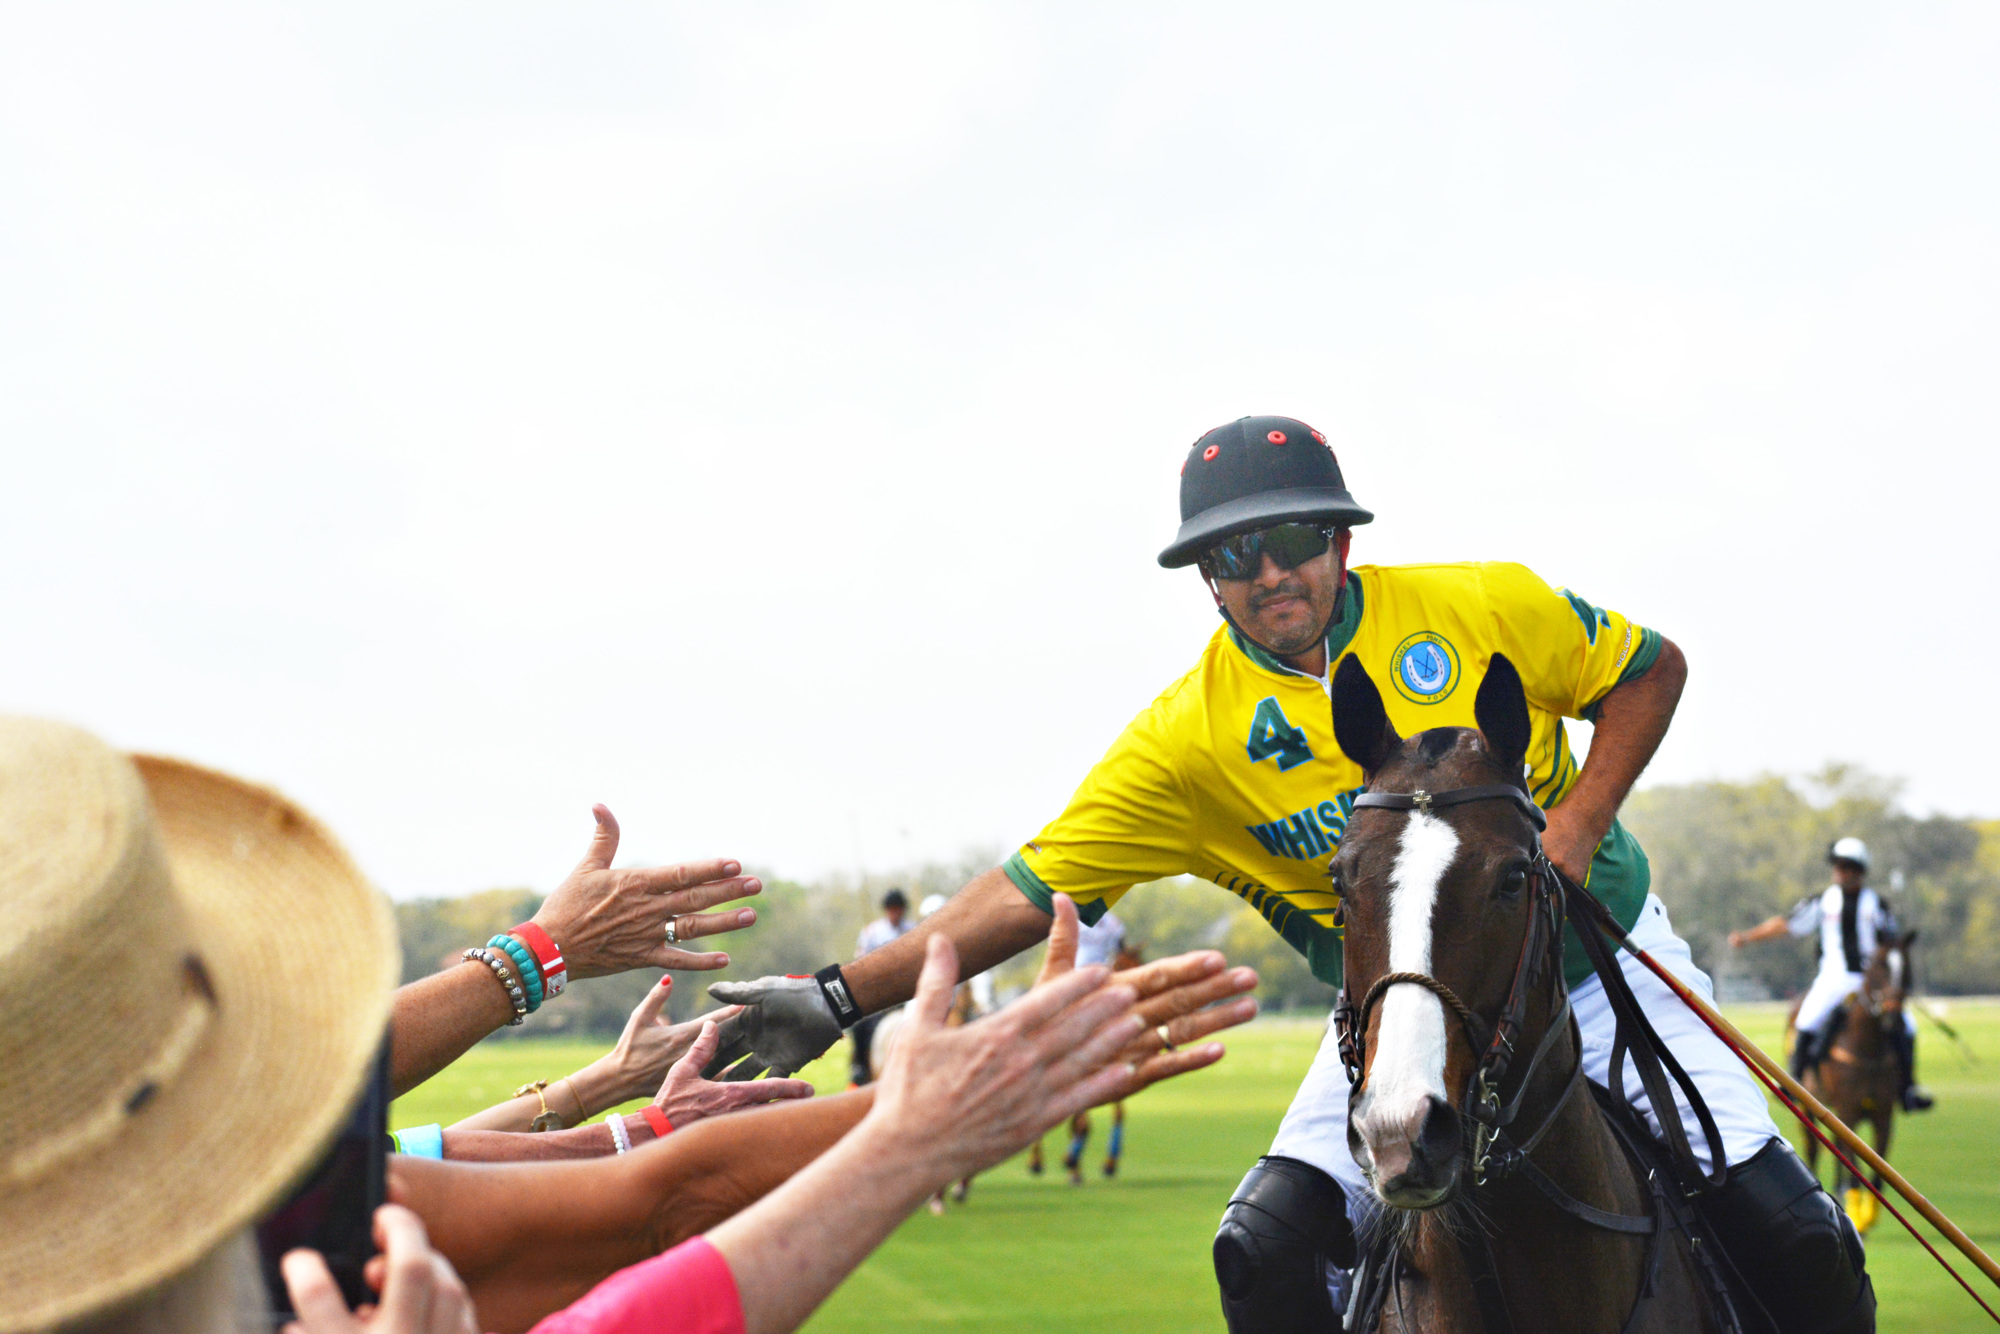 Guillermo Aguero greets fans before a match at the Sarasota Polo Club.